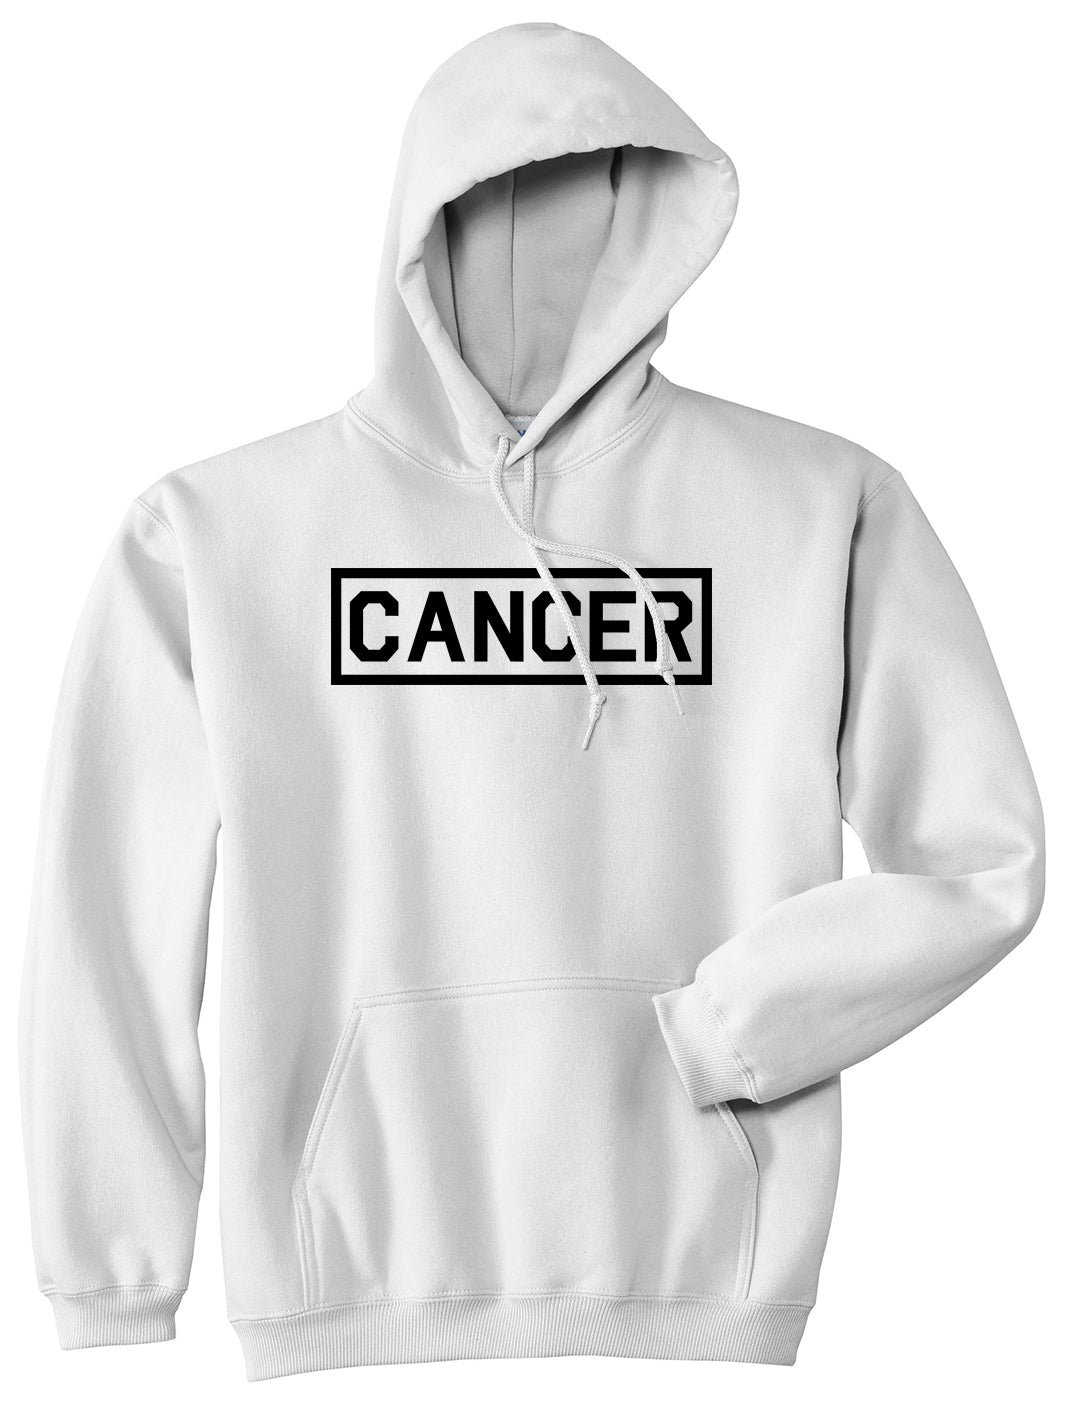 Cancer Horoscope Sign Mens White Pullover Hoodie by KINGS OF NY